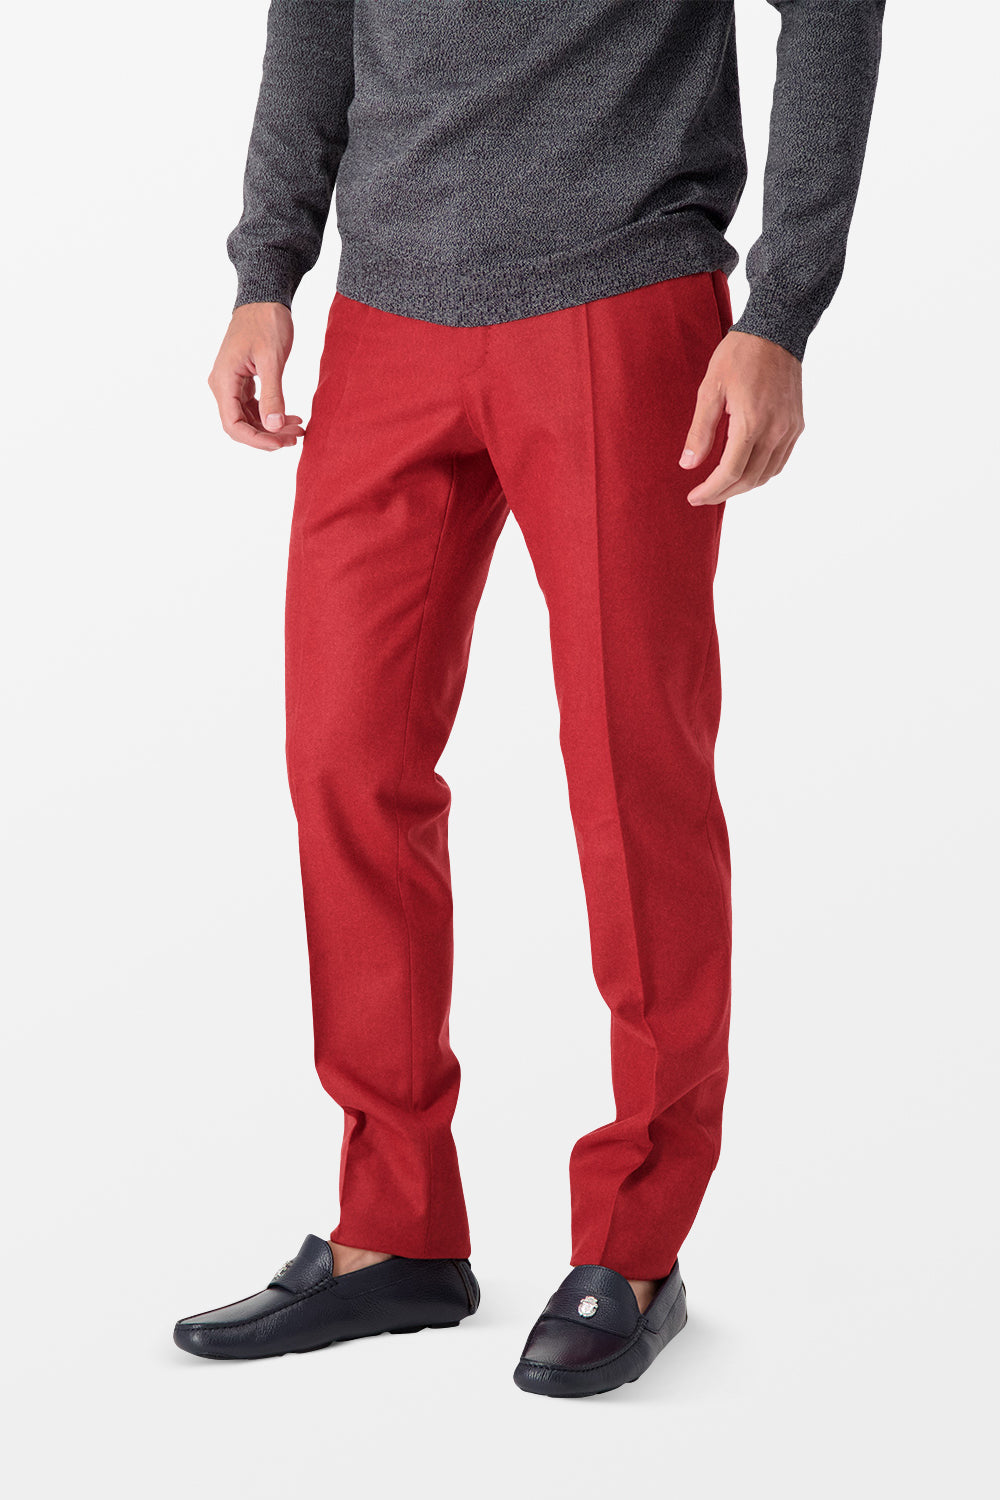 Incotex Red Classic Trousers